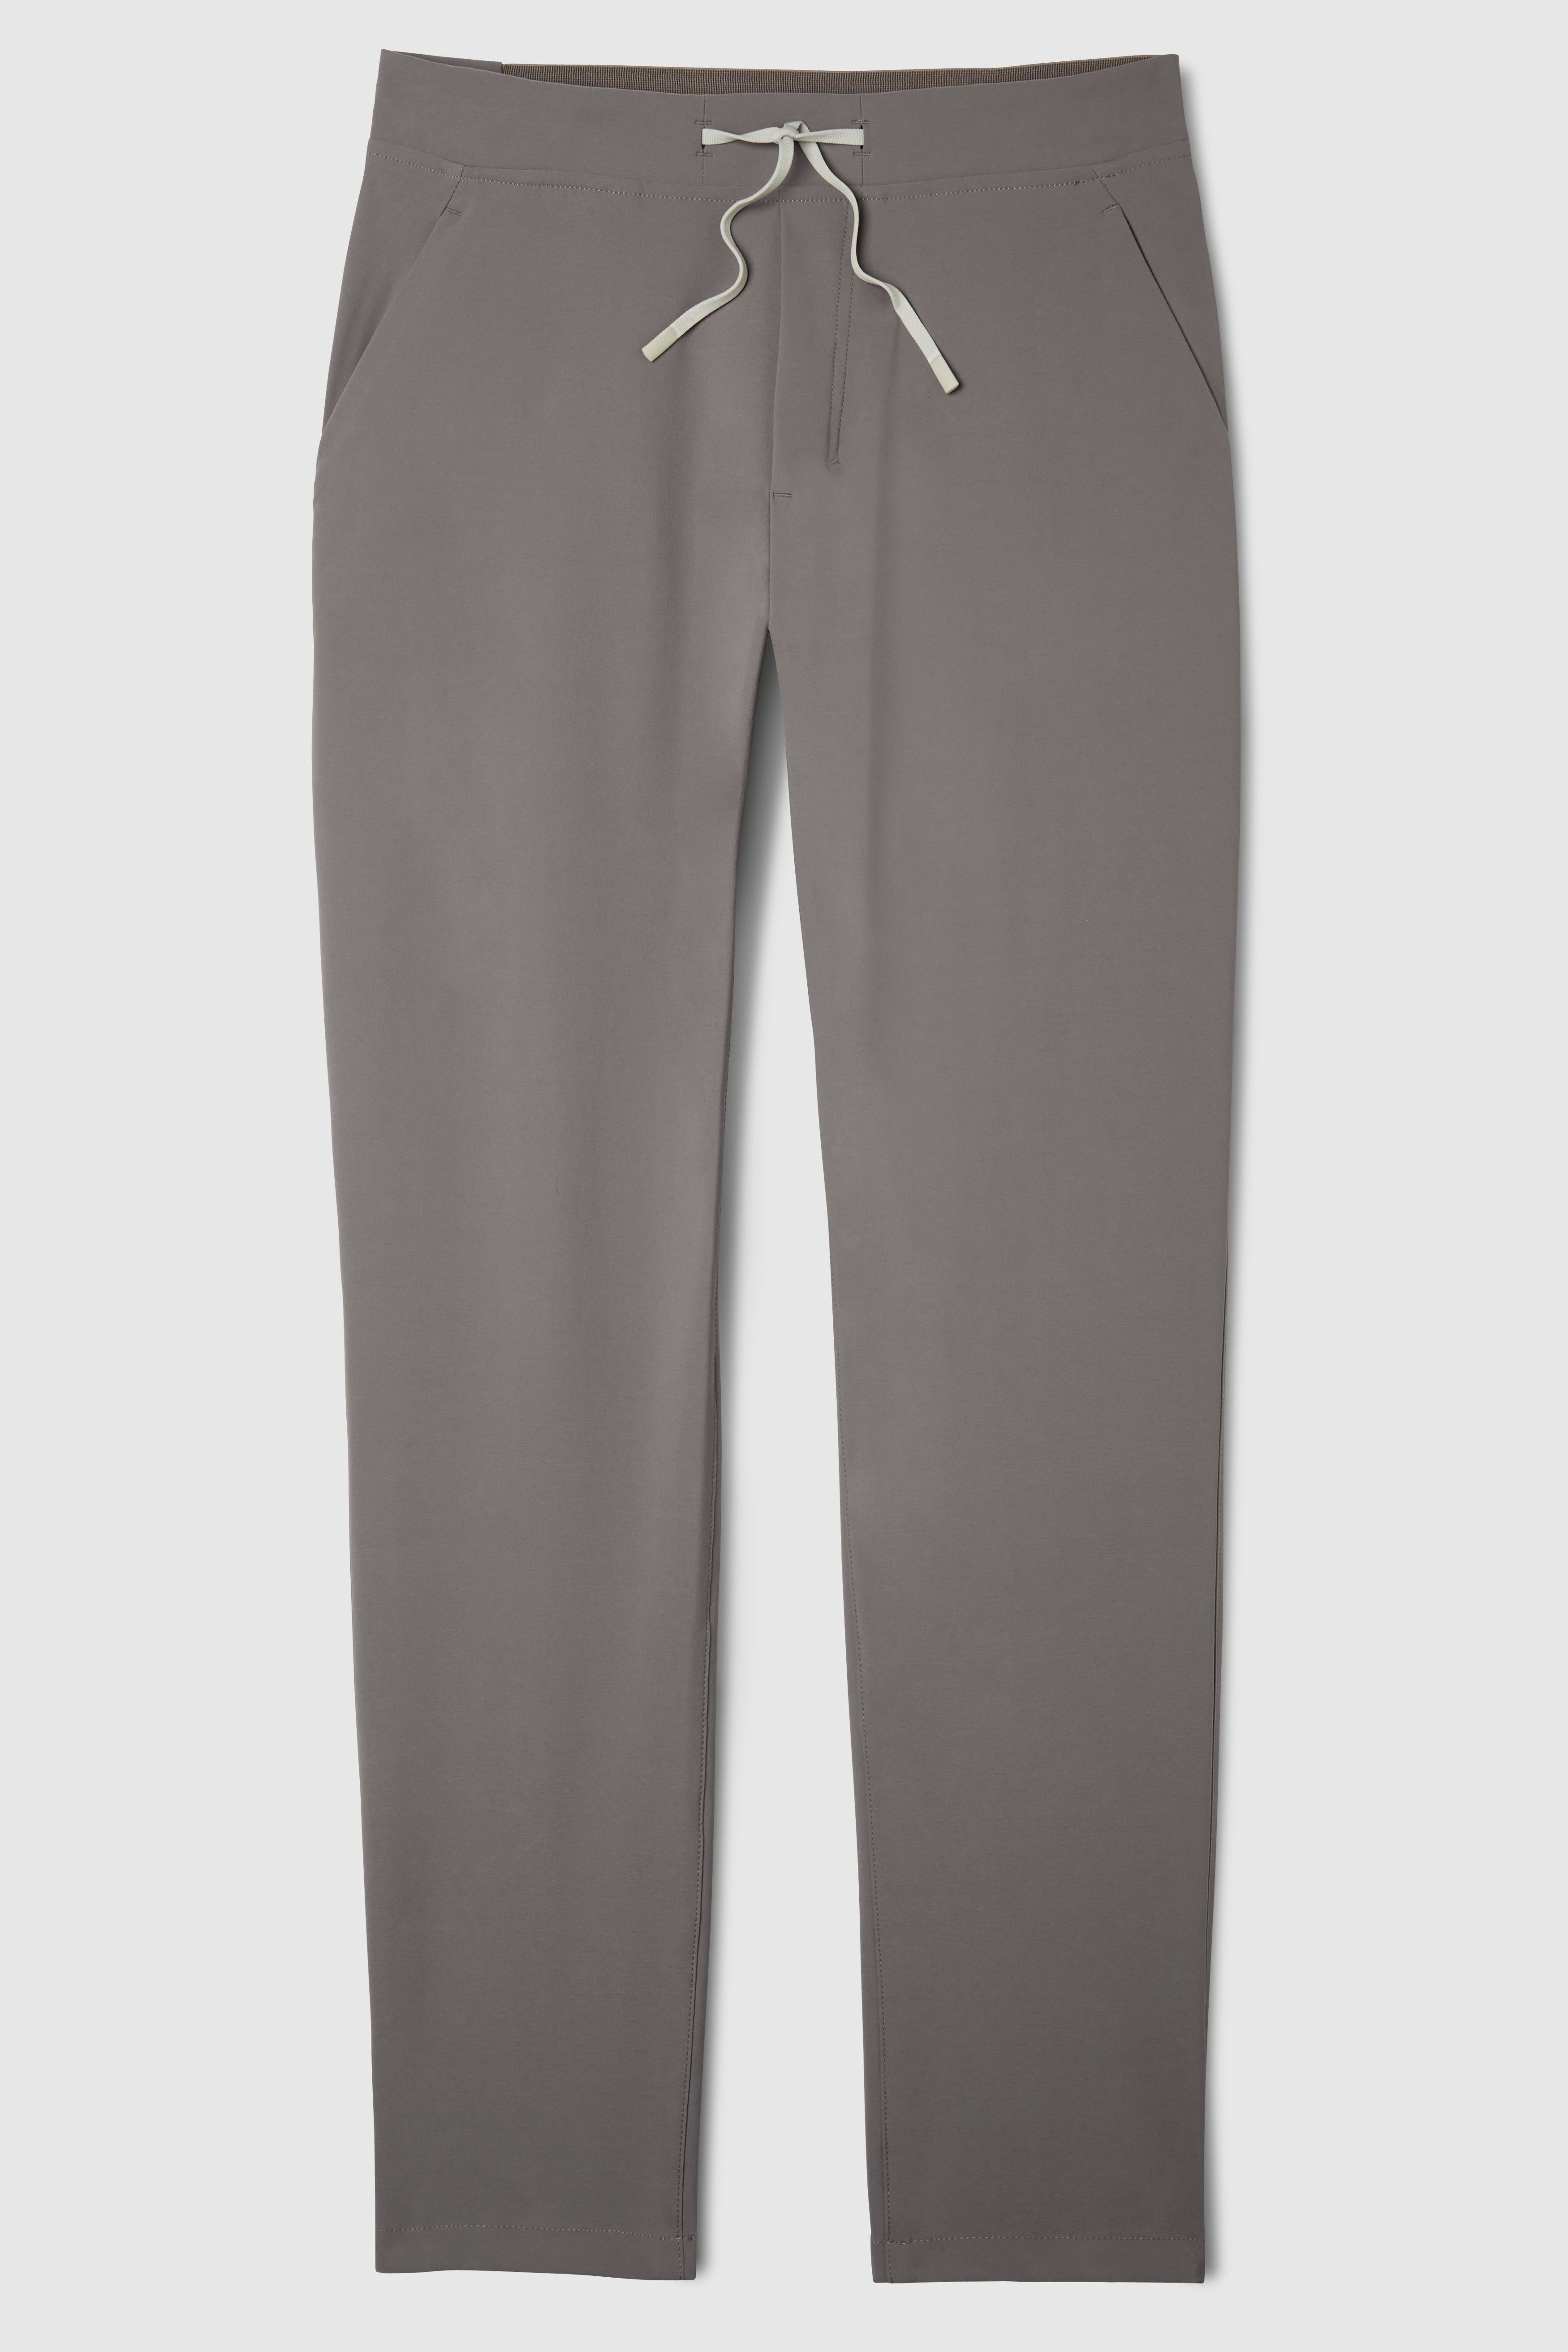 Friday FWD Men's Stretch Commuter Pant